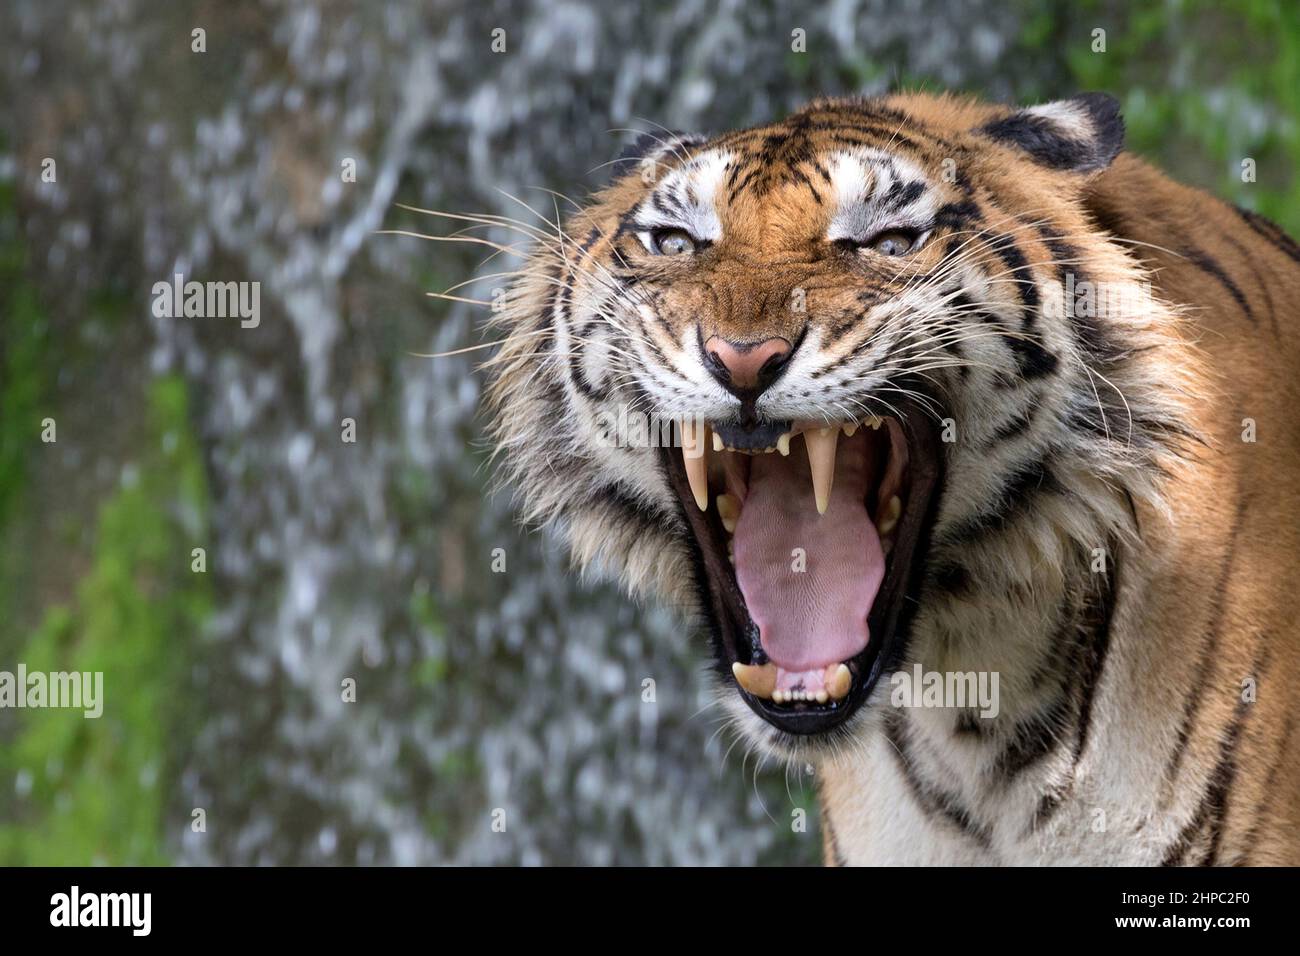 Asian tigers are roaring in a natural atmosphere. Stock Photo